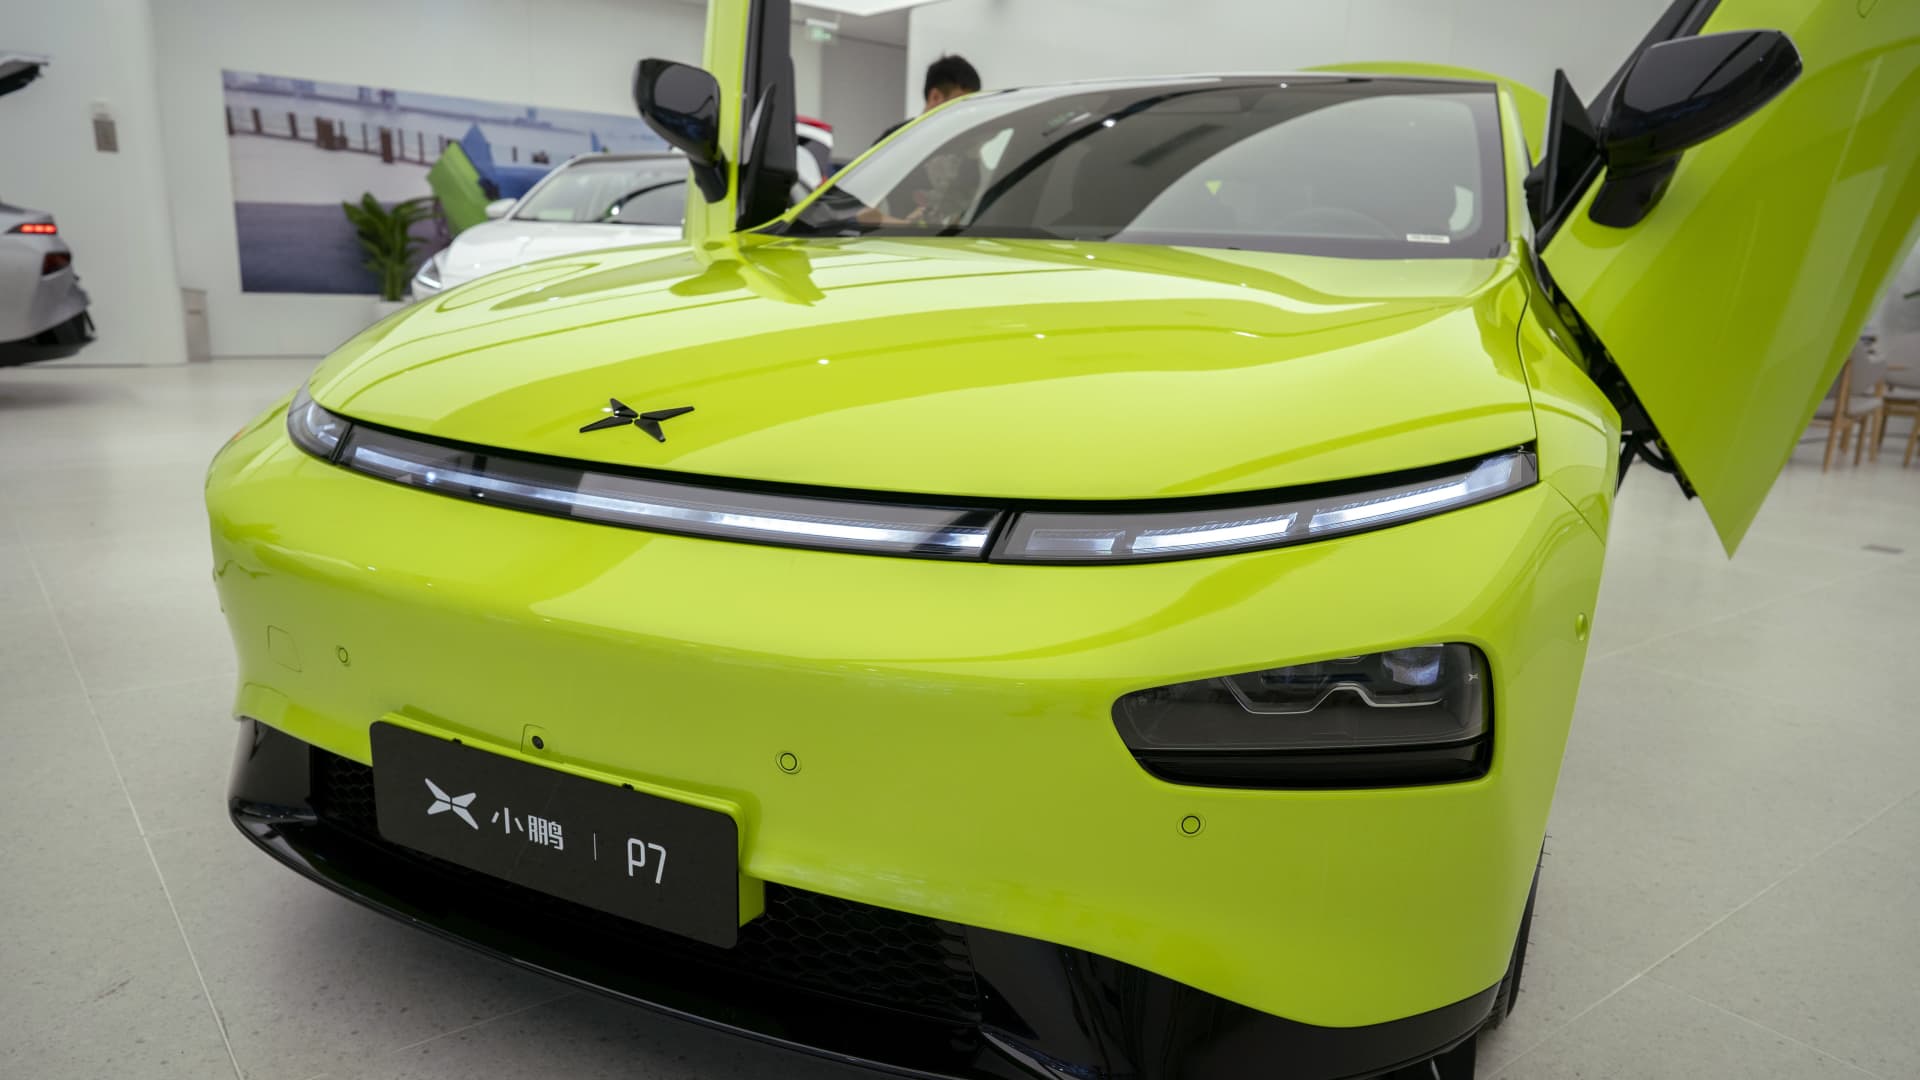 Chinese electric car manufacturer Xpeng is launching a Tesla Model Y competitor in 2023